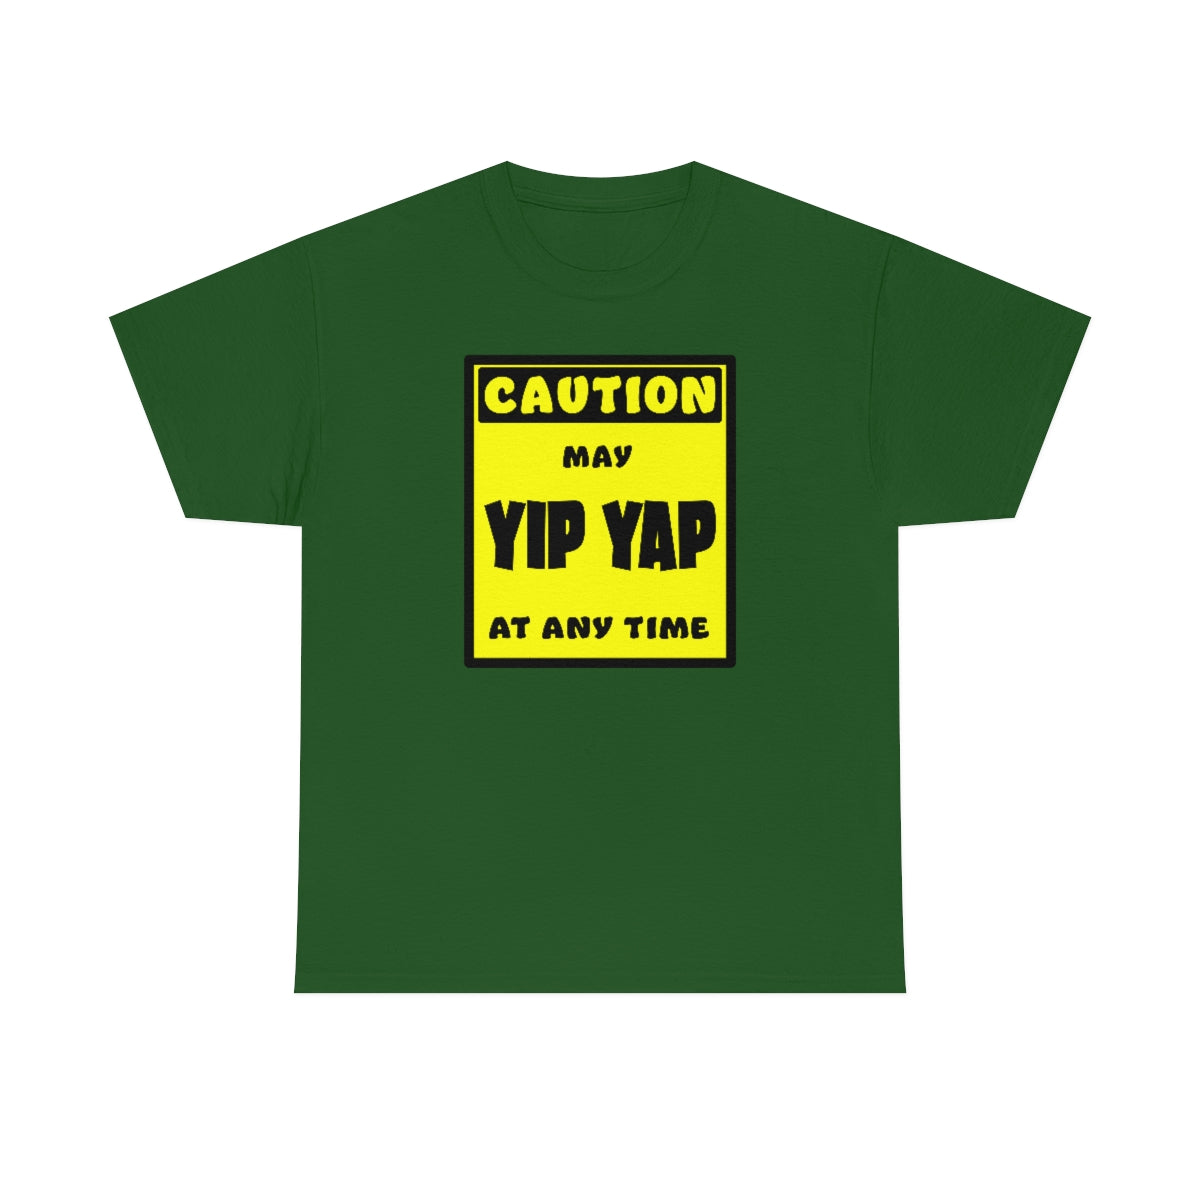 CAUTION! May Yip Yap at any time! - T-Shirt T-Shirt AFLT-Whootorca Green S 